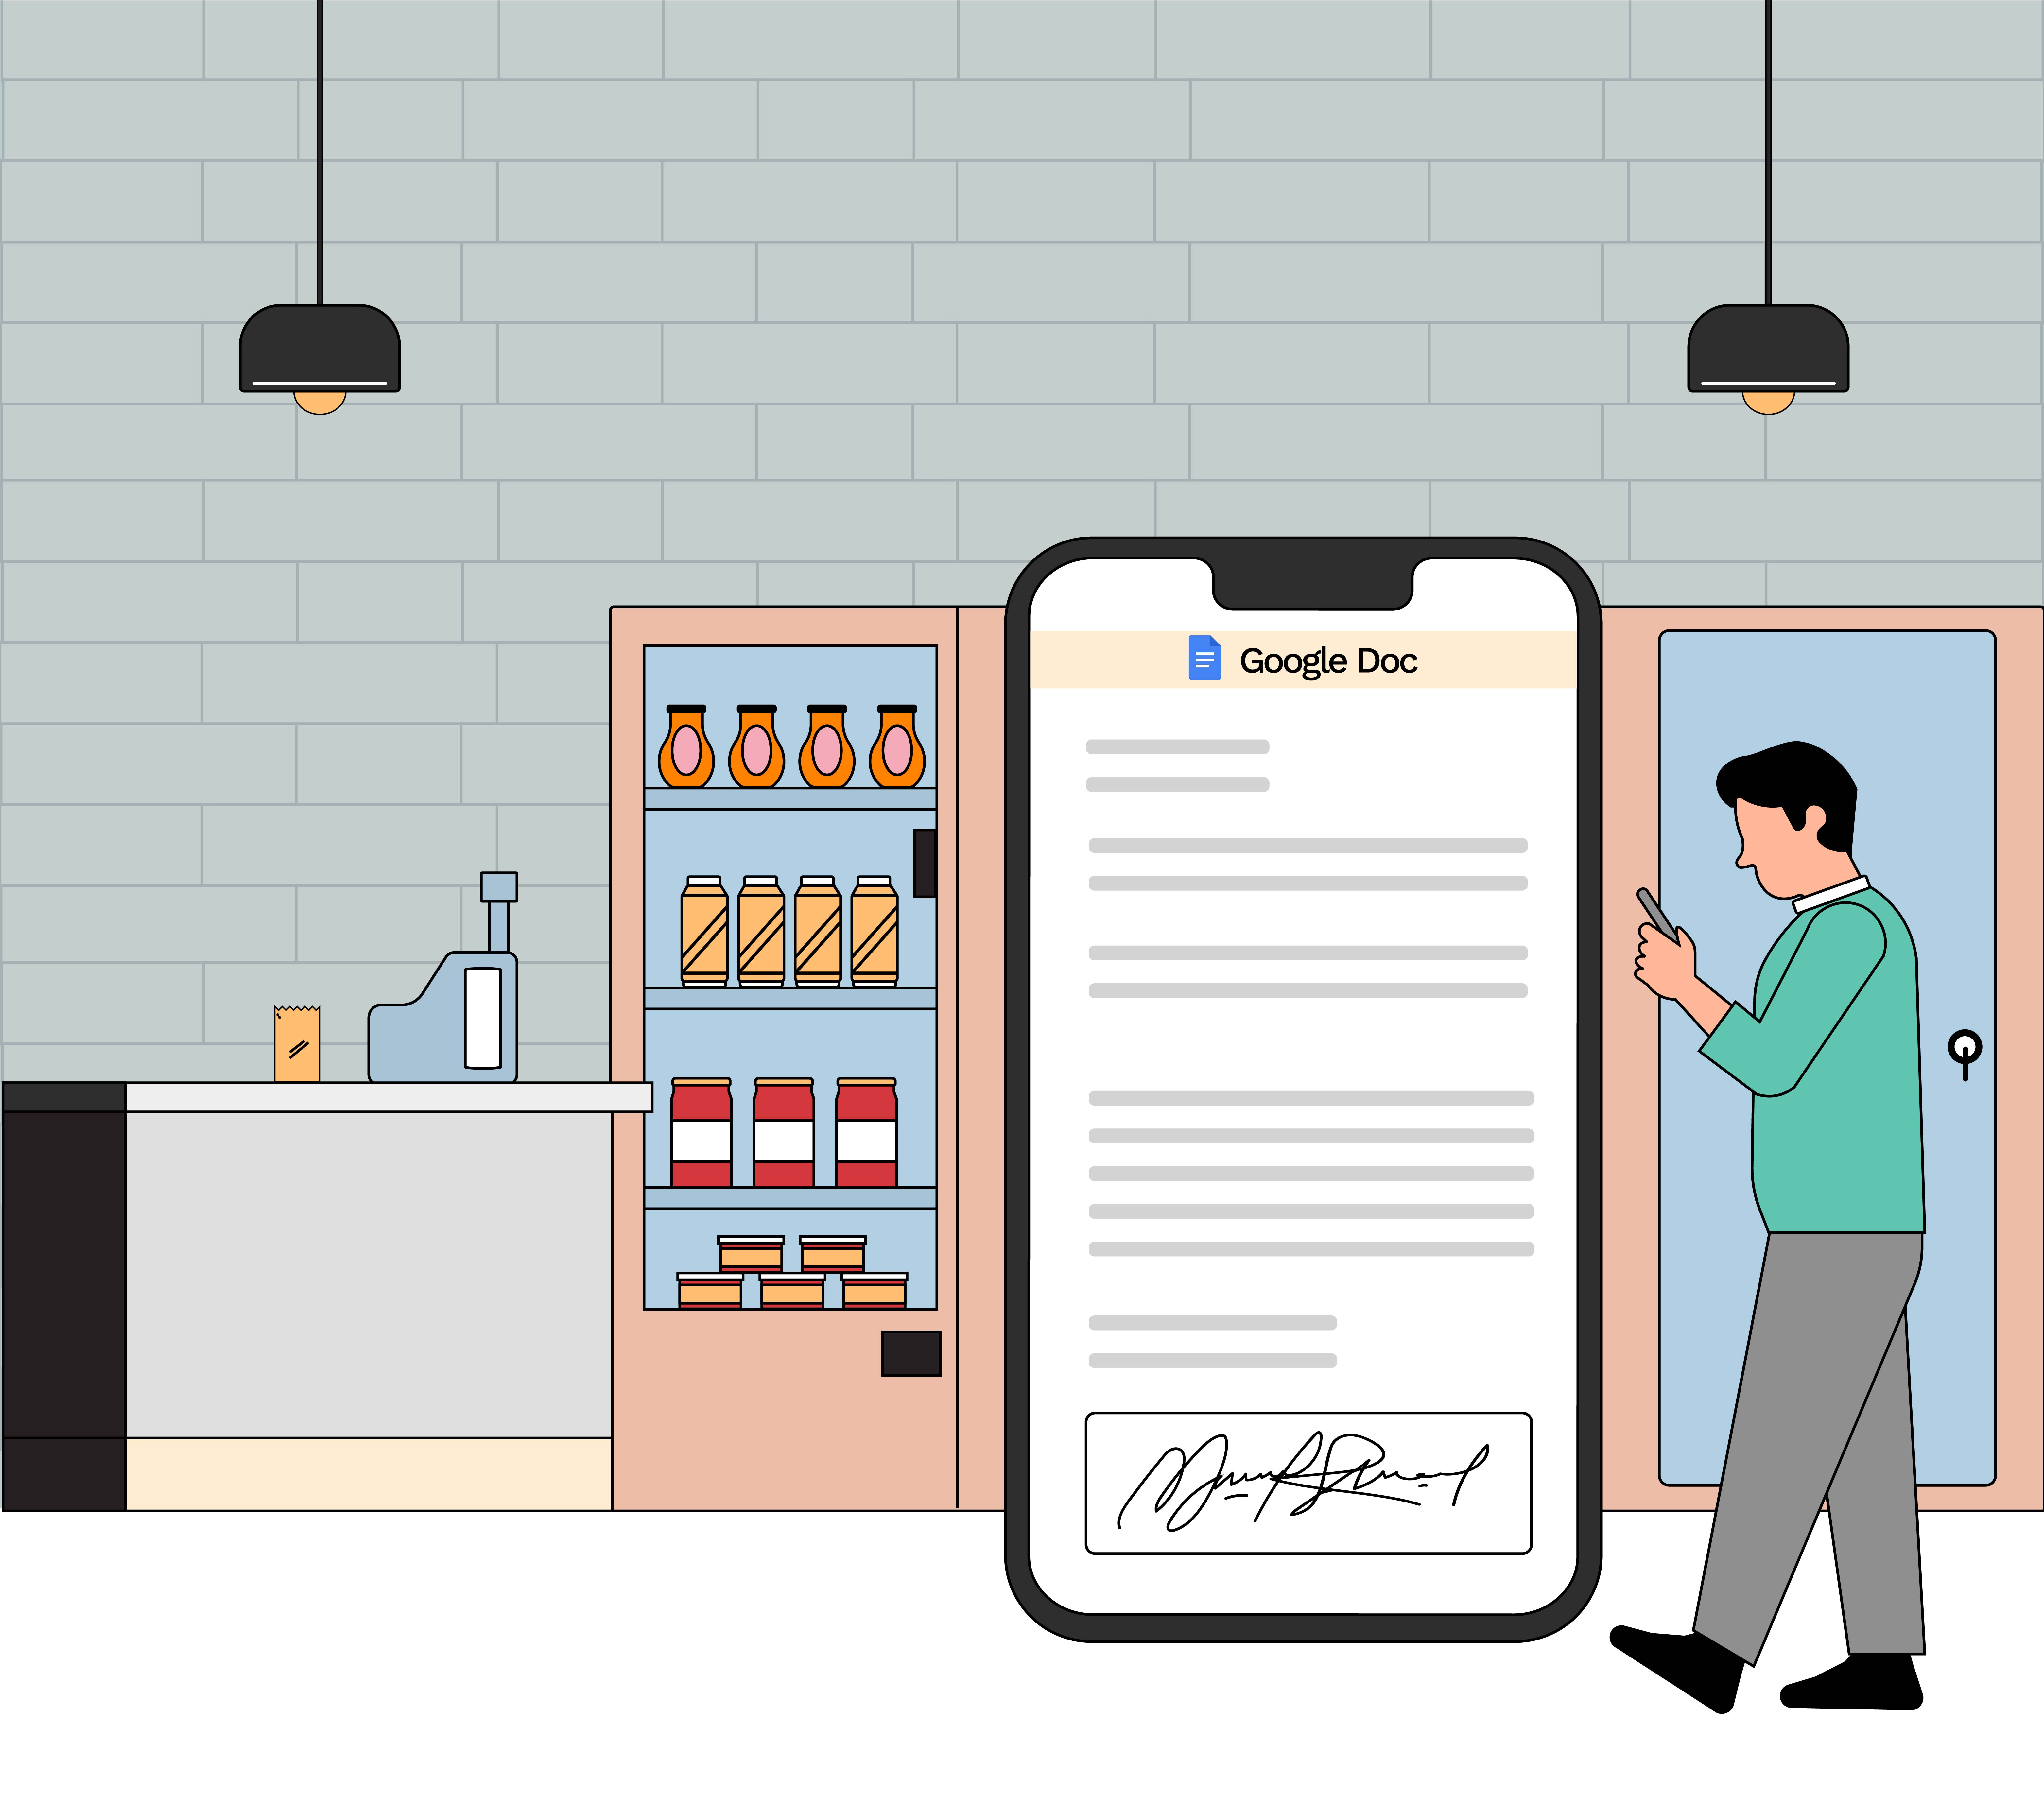 Adding your signature on Google Docs is free, and you can sign as many documents as you want from your Apple or Android device.